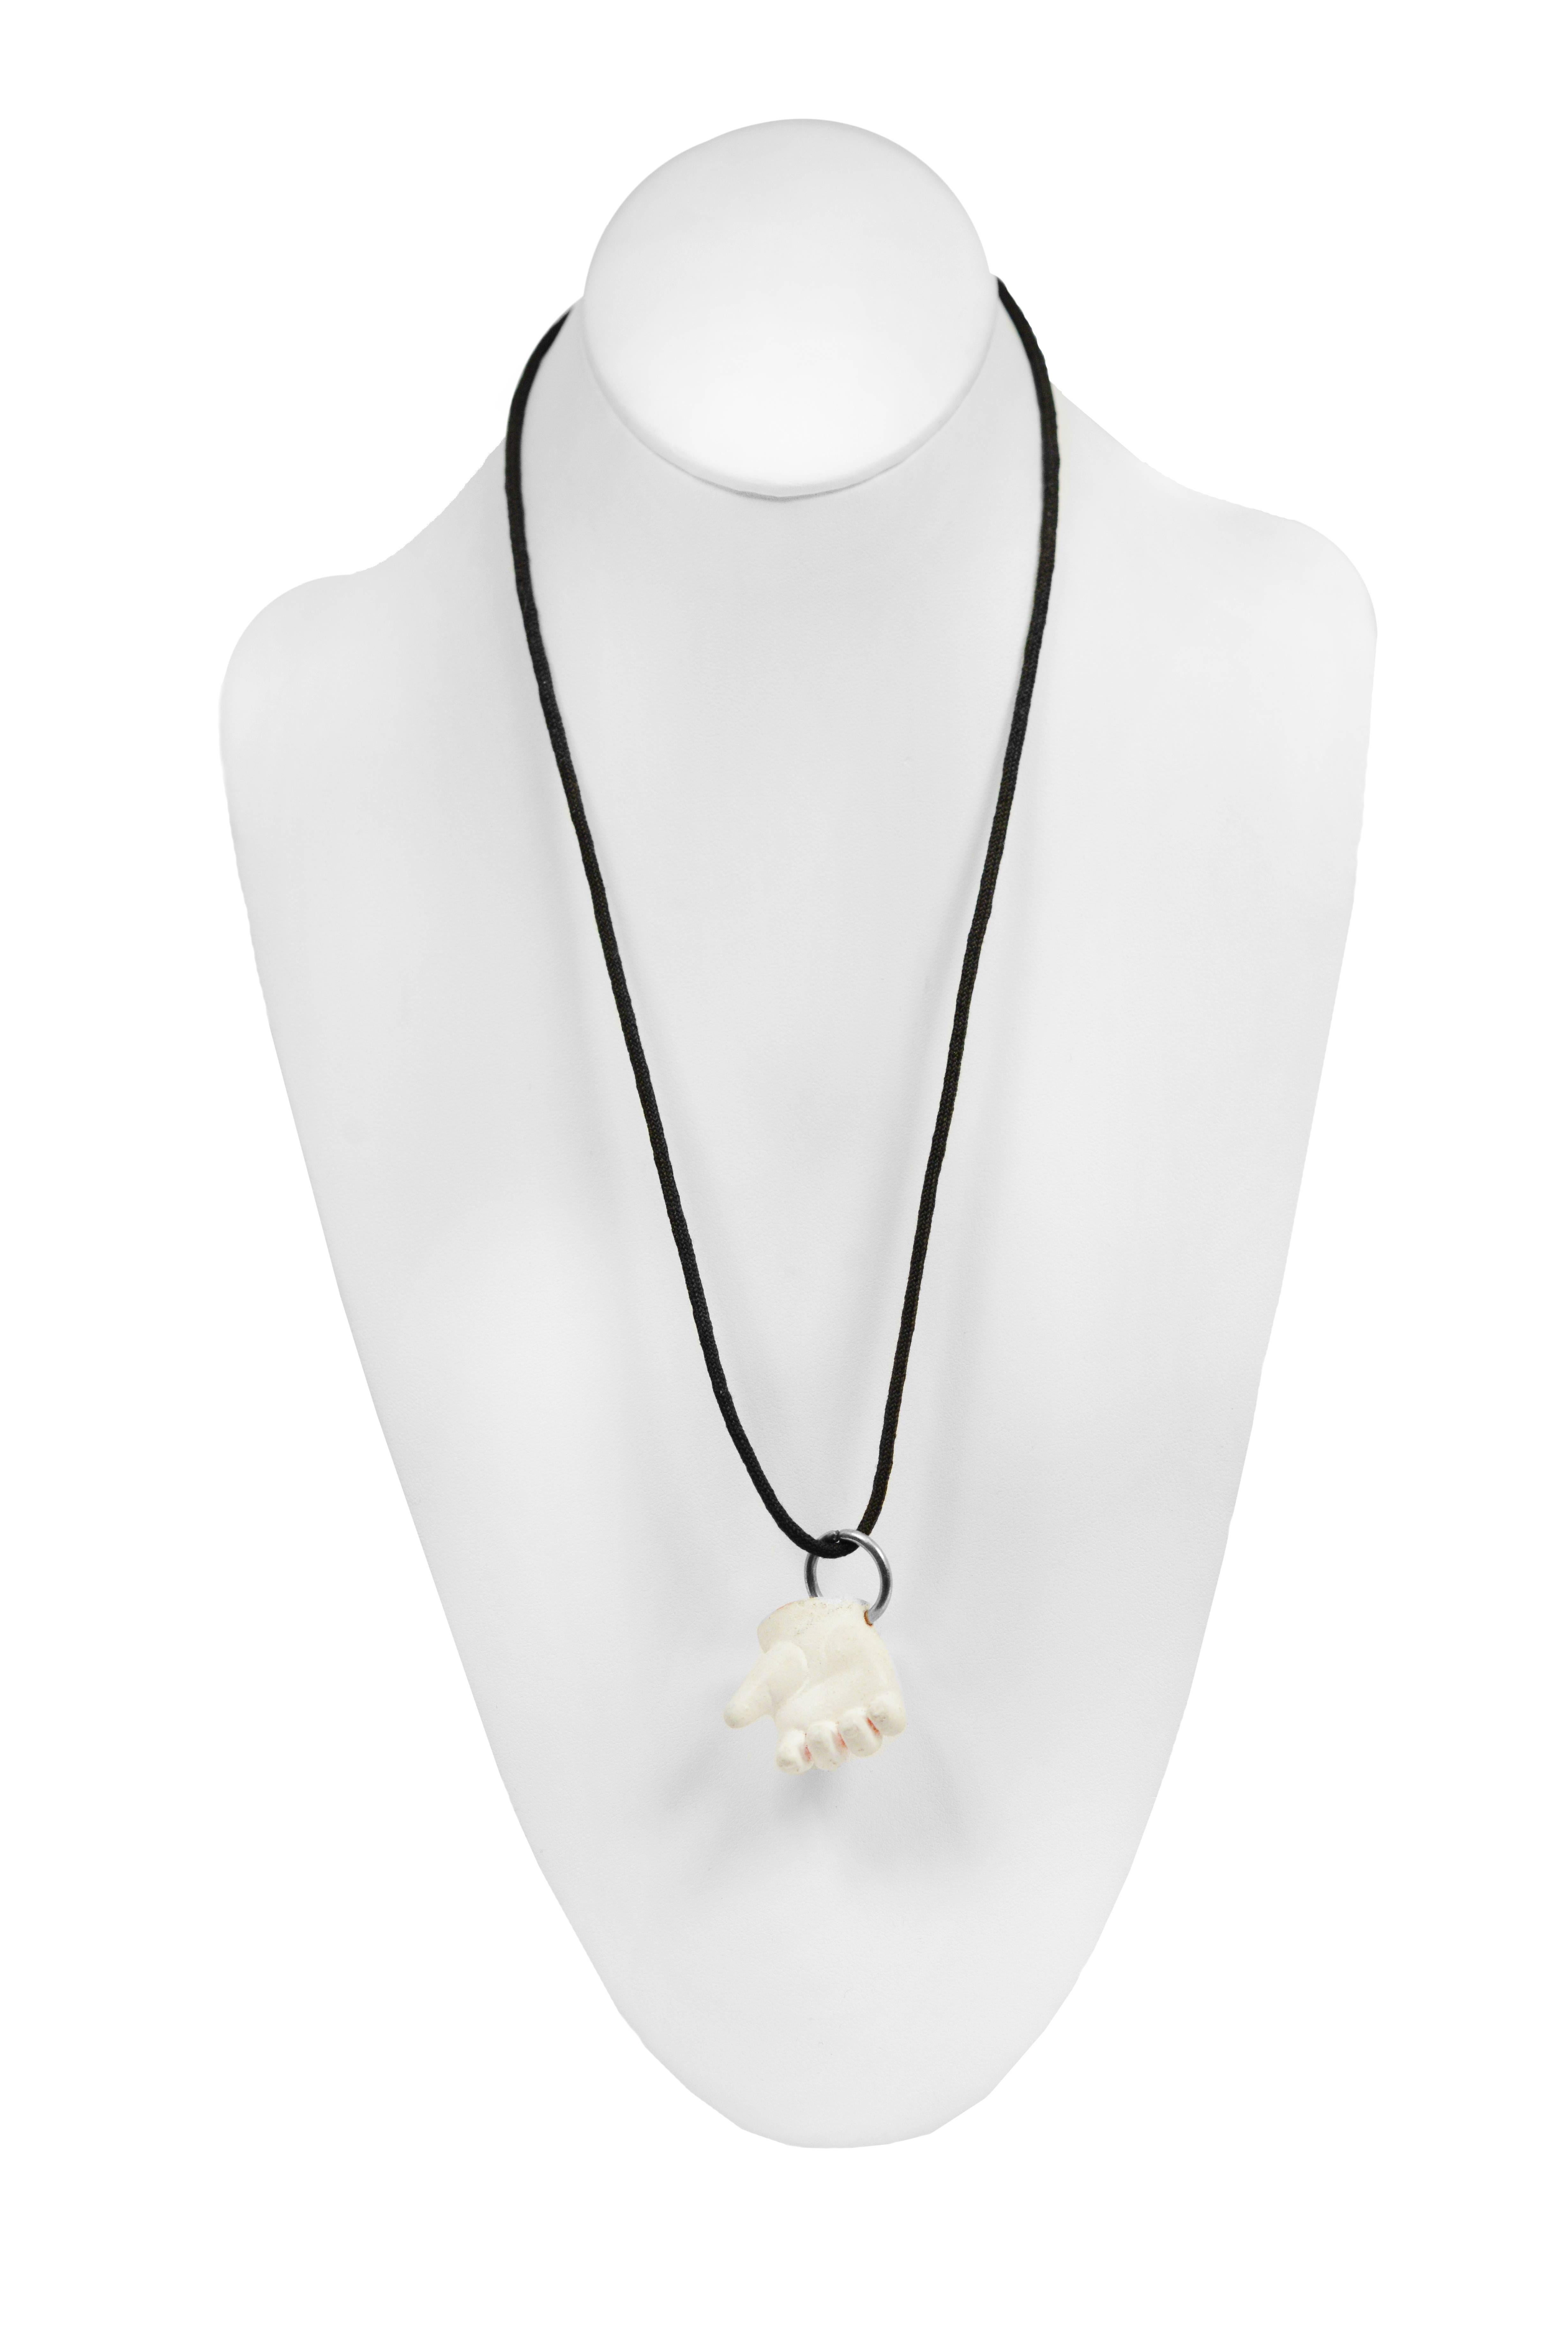 Vintage Maison Martin Margiela black necklace featuring a white doll hand pendant.
Please inquire for additional images.